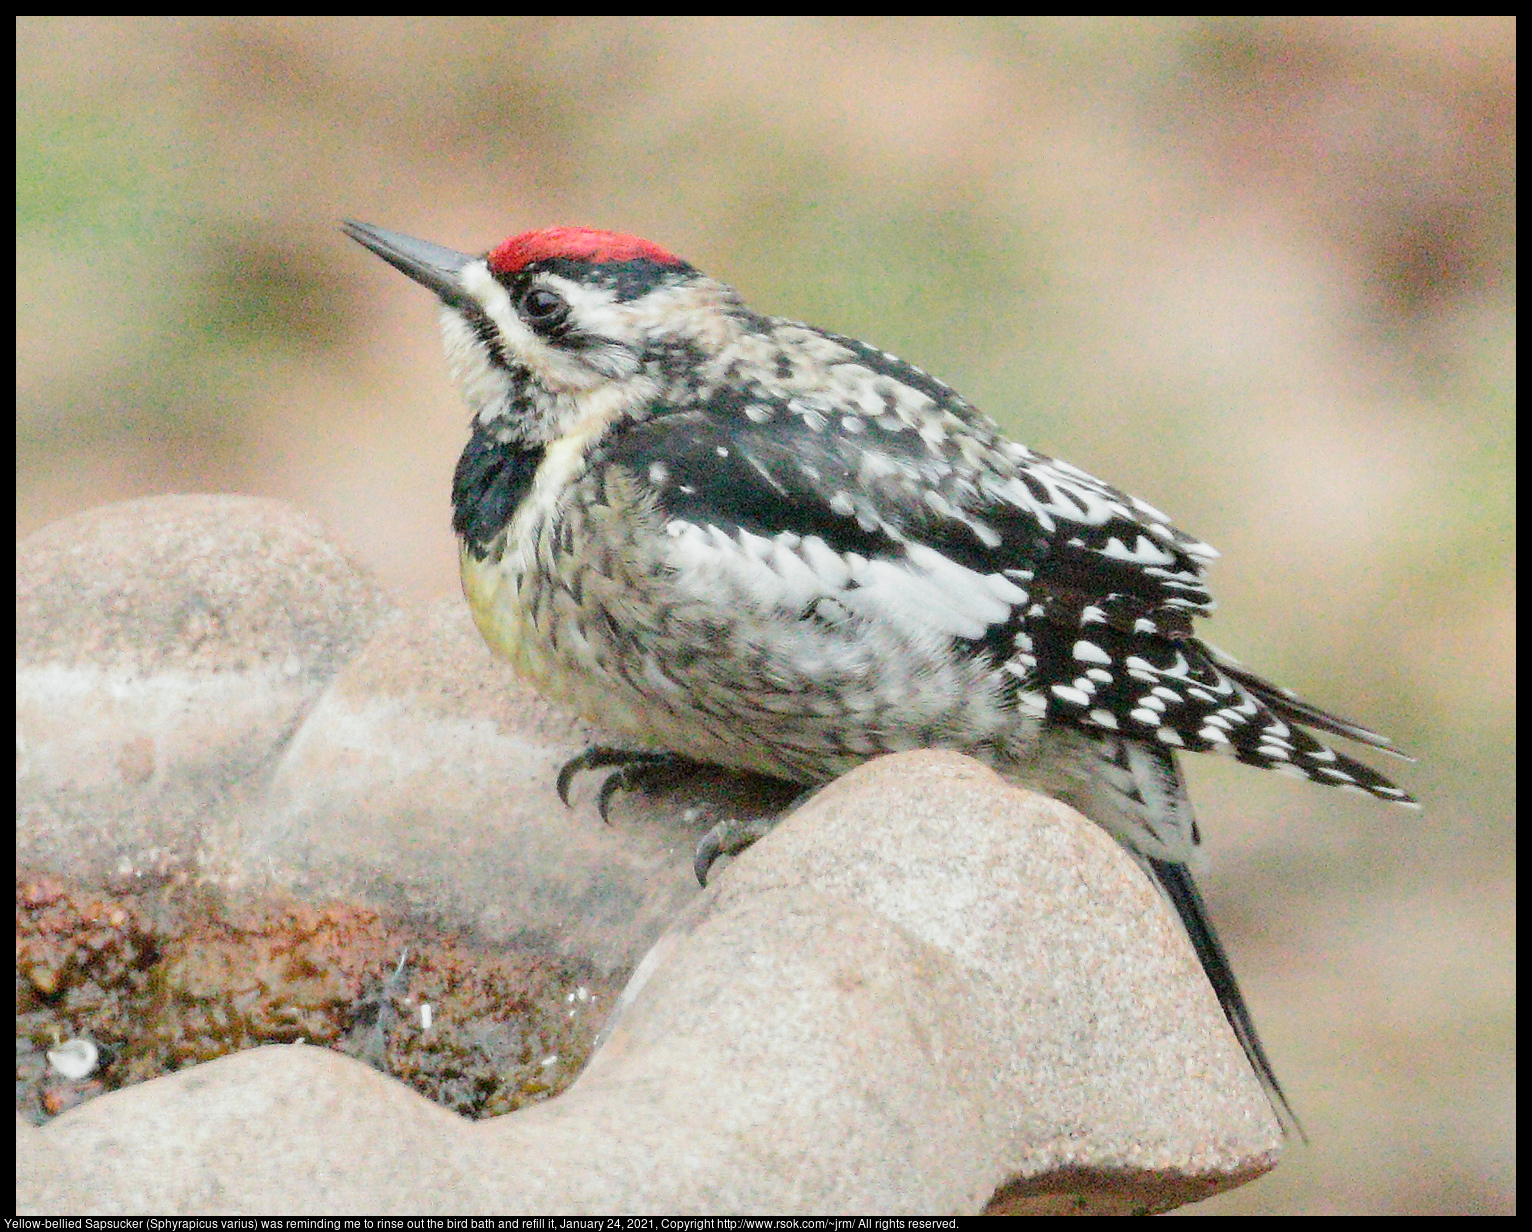 Yellow-bellied Sapsucker (Sphyrapicus varius) was reminding me to rinse out the bird bath and refill it, January 24, 2021